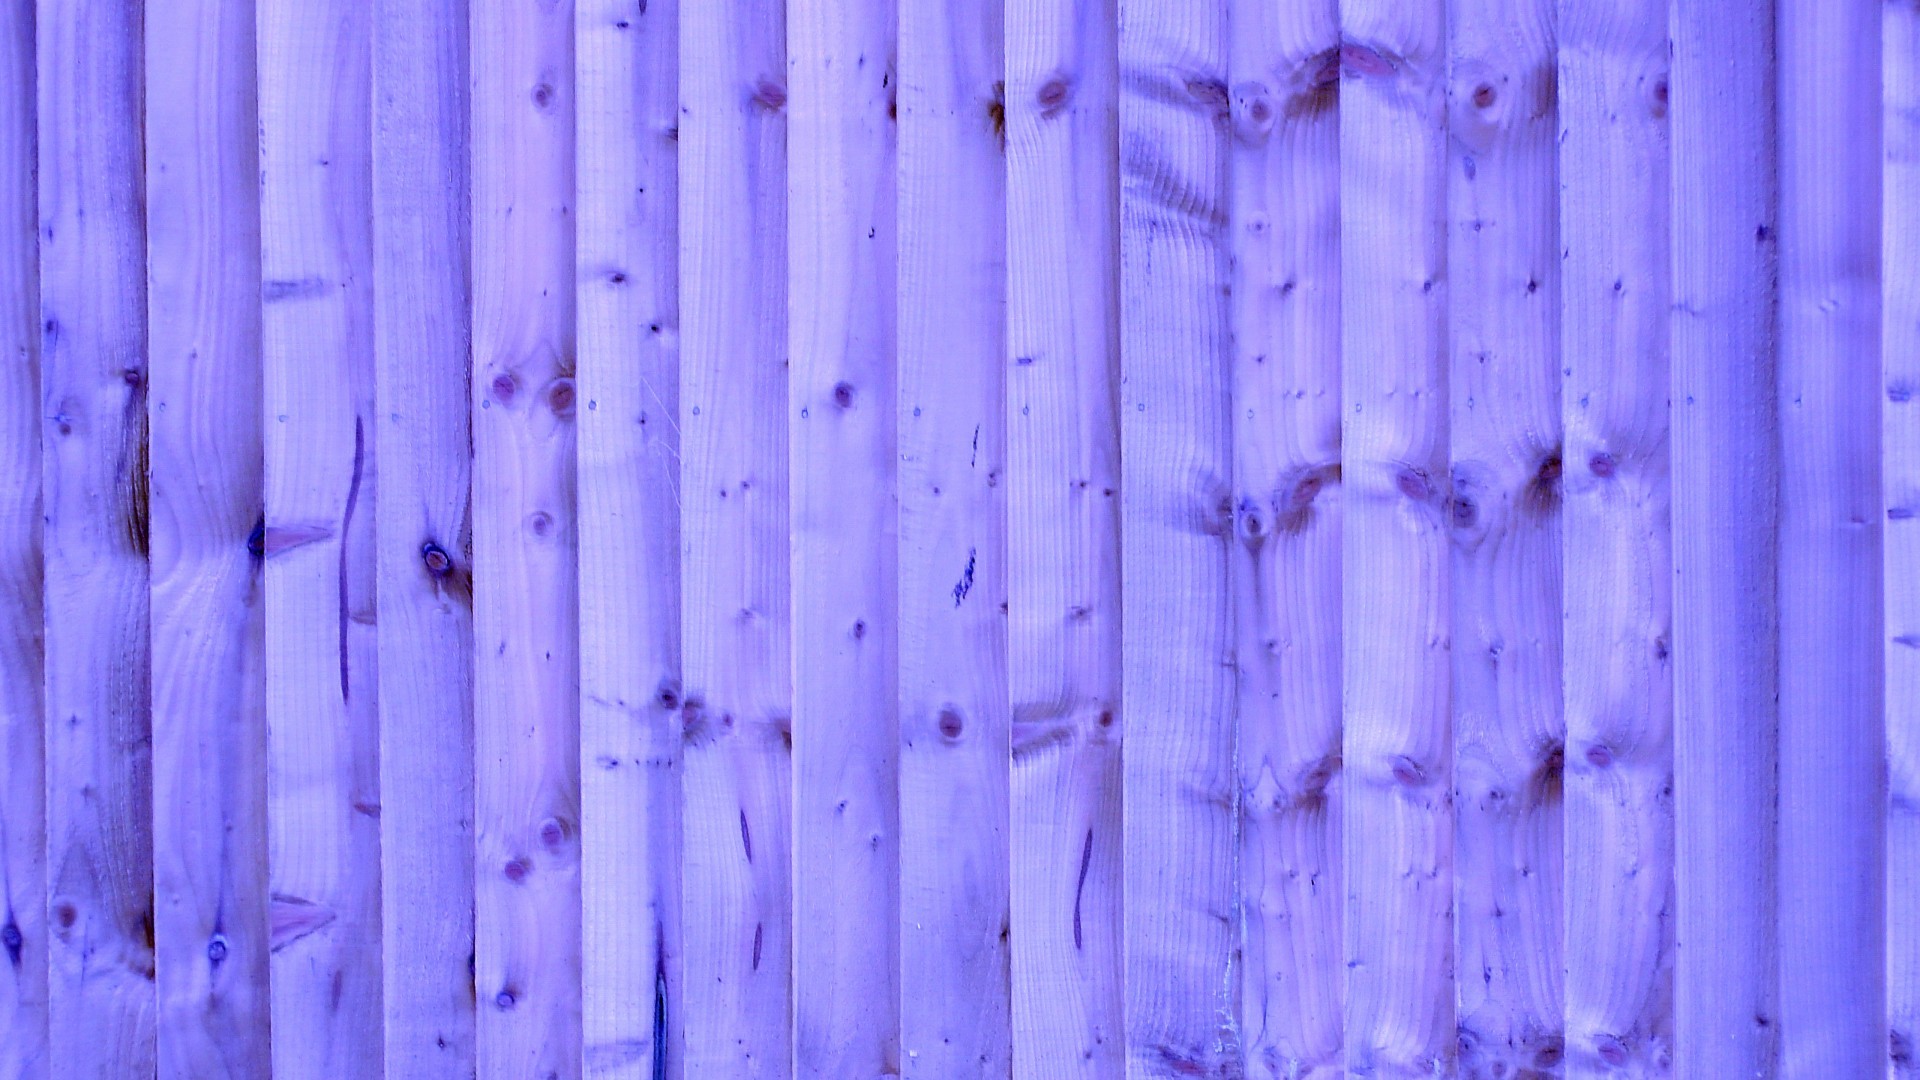 1920x1080 Lilac Wooden Fence Background